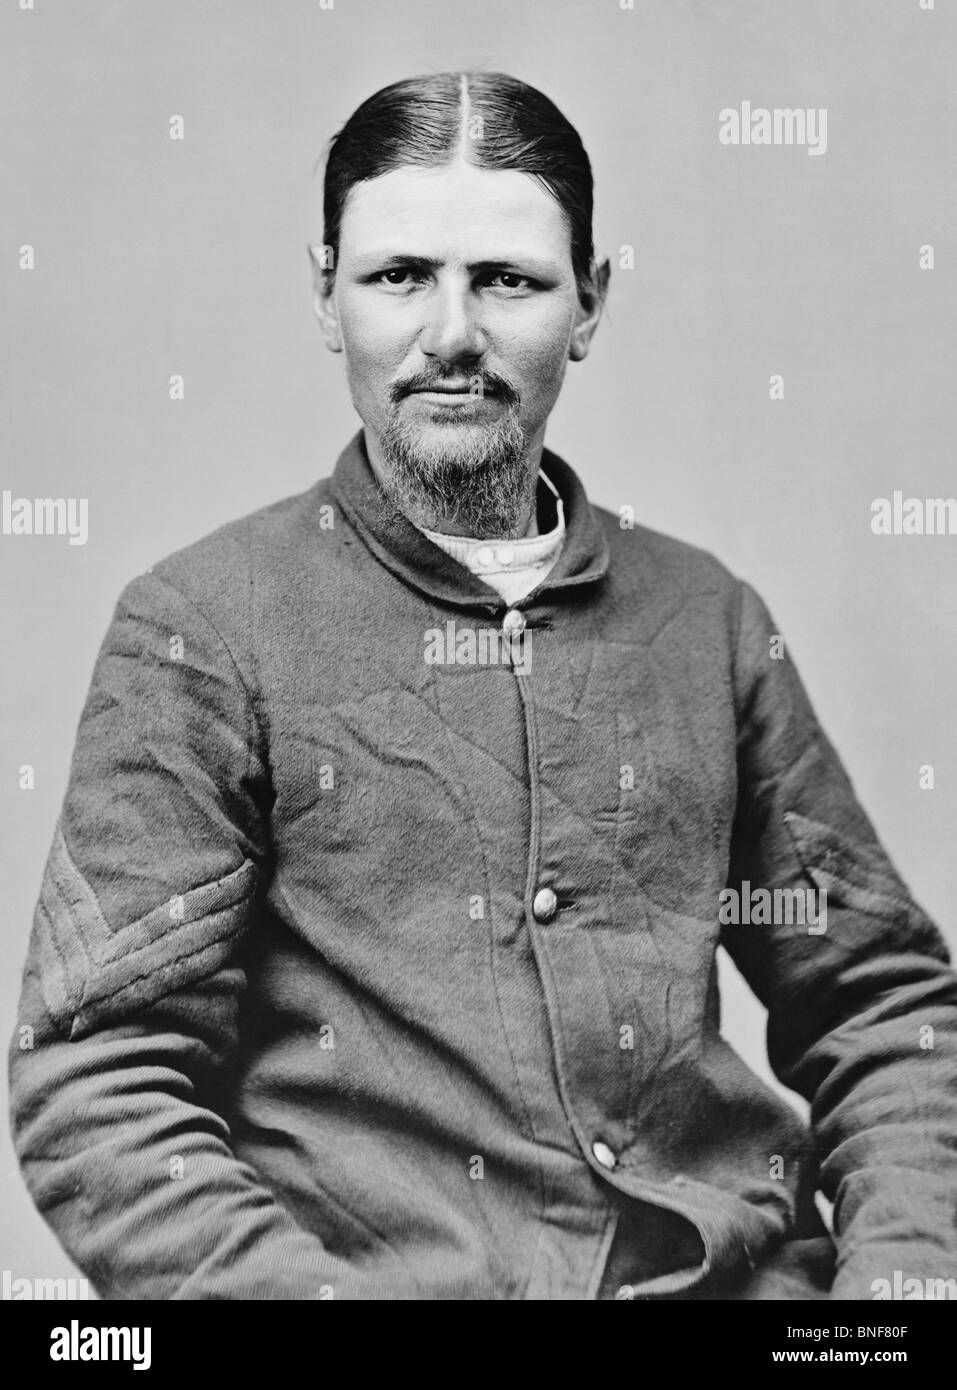 Sergeant Boston Corbett (1832 - c1894) - the Union Army soldier who fatally shot John Wilkes Booth (Abraham Lincoln's assassin). Stock Photo